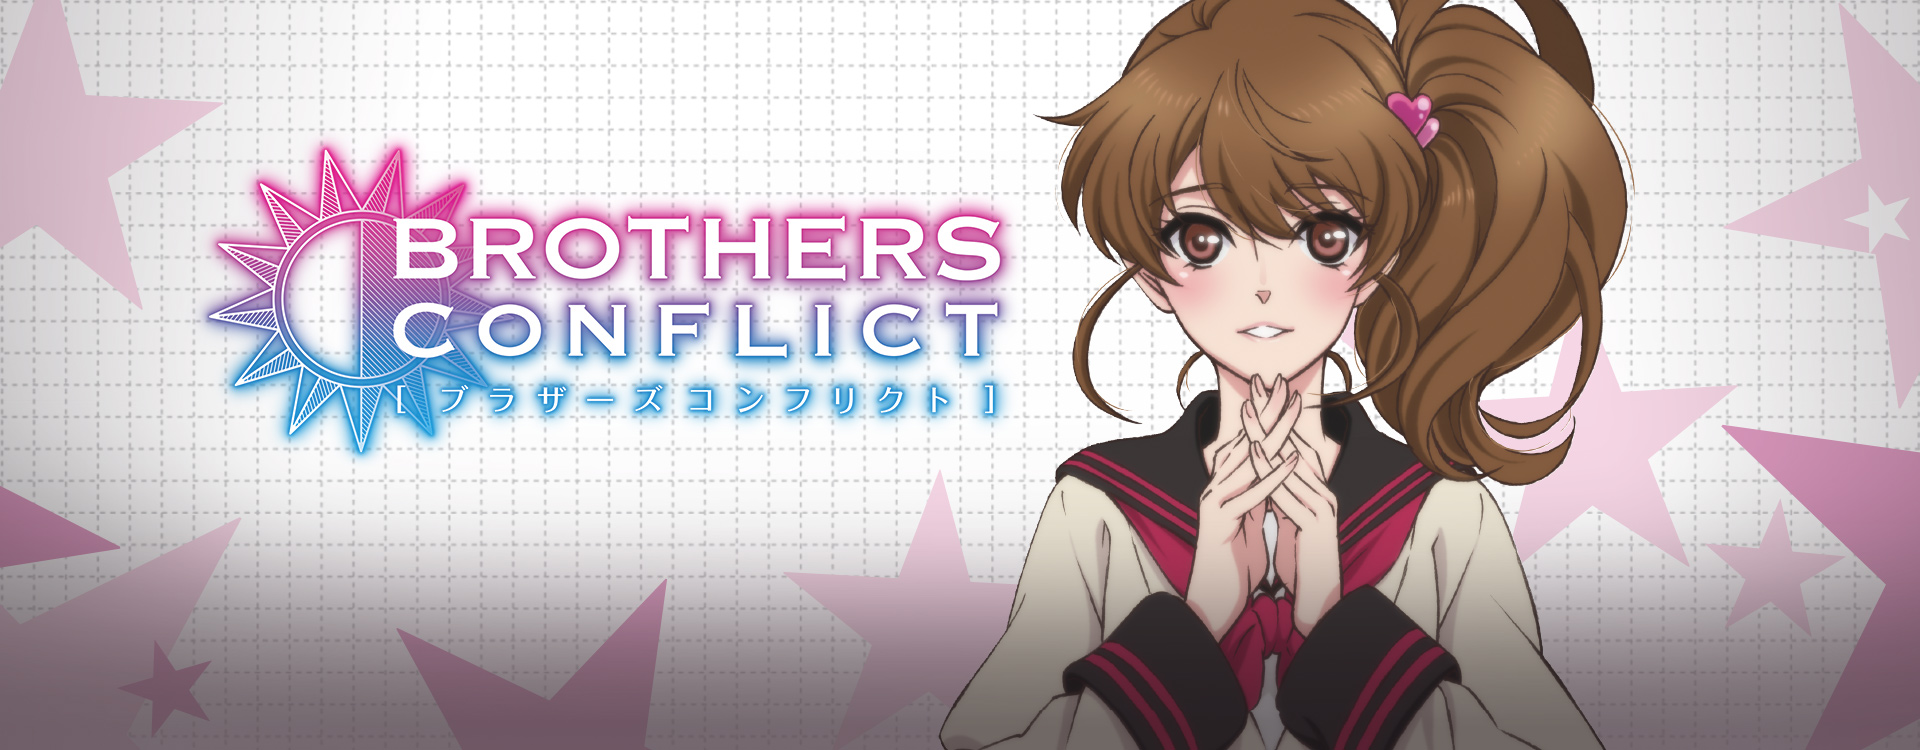 Watch Brothers Conflict Episodes Sub Dub Romance Shoujo Anime